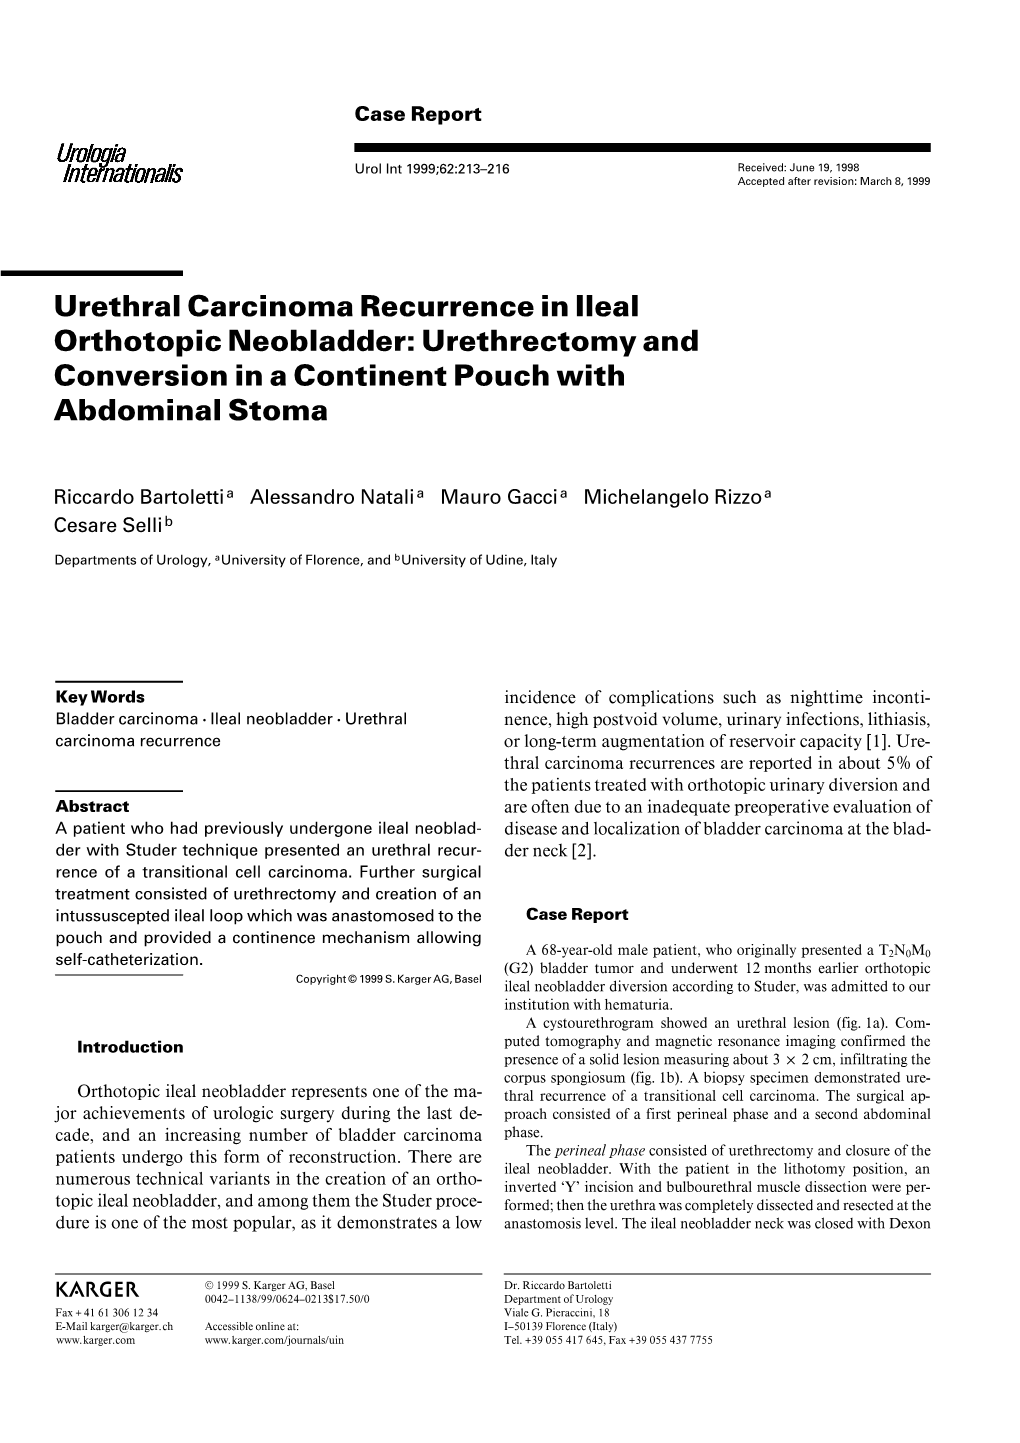 Urethral Carcinoma Recurrence in Ileal Orthotopic Neobladder: Urethrectomy and Conversion in a Continent Pouch with Abdominal Stoma